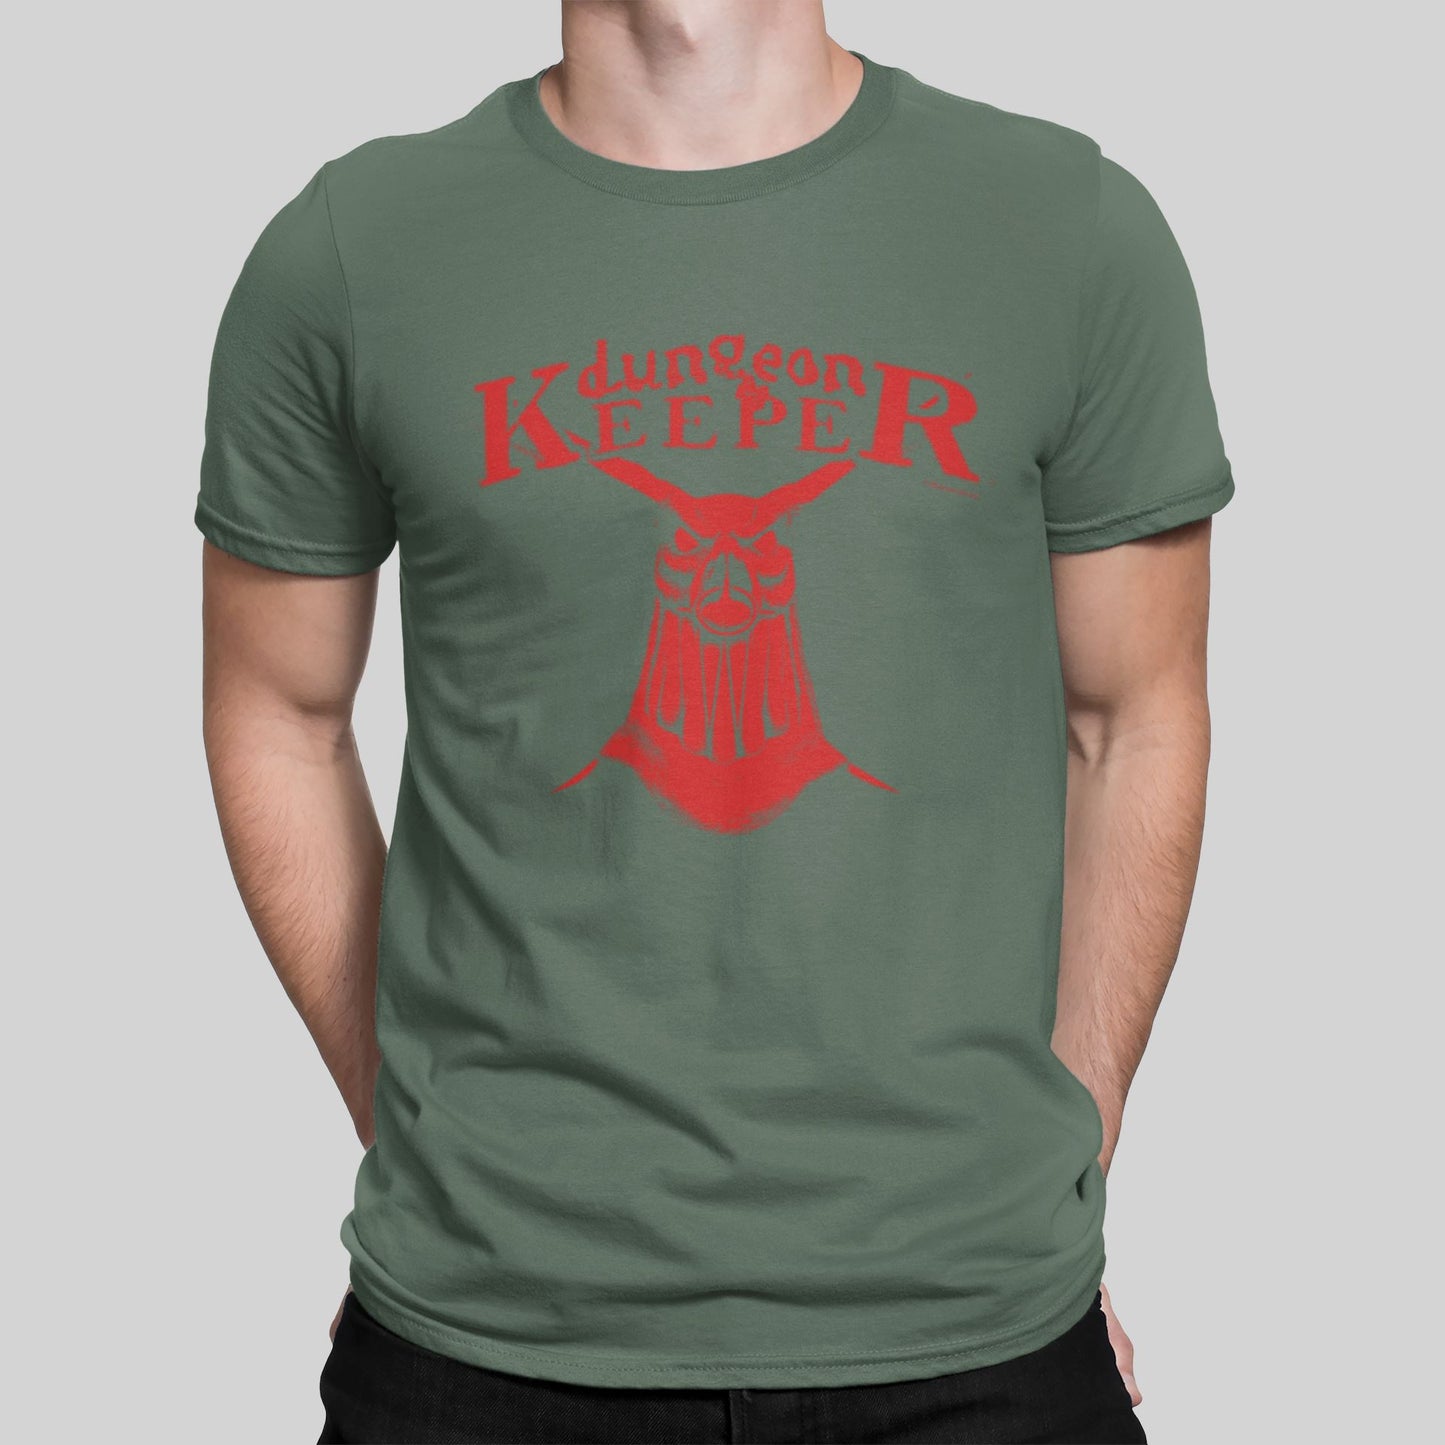 Dungeon Keeper Retro Gaming T-Shirt SIOW Edition T-Shirt Seven Squared Small 34-36" Military Green 